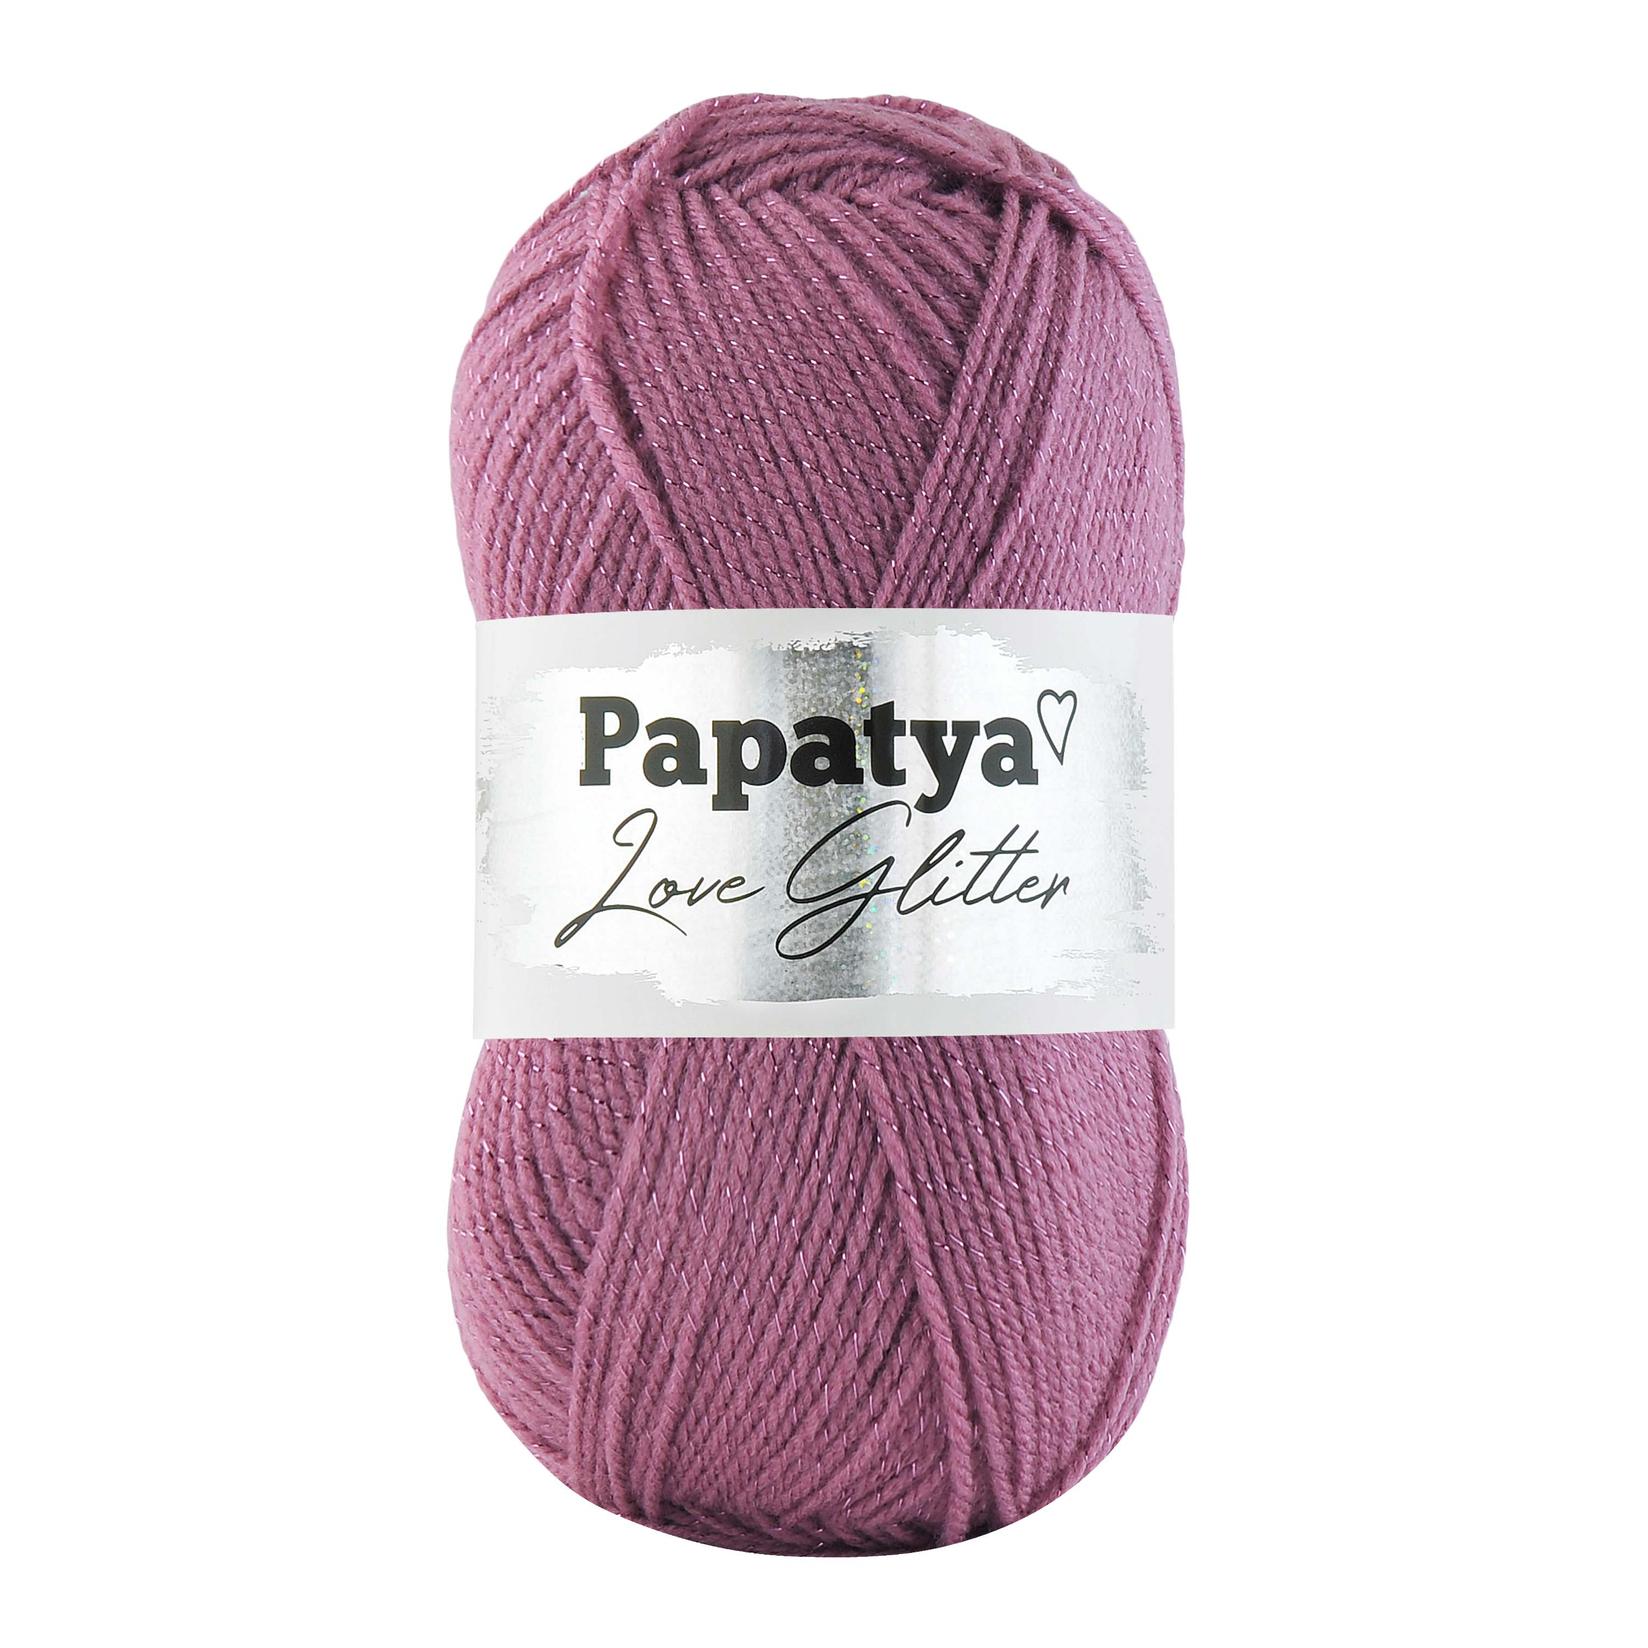 Selected image for PAPATYA Vunica Love Glitter 3570